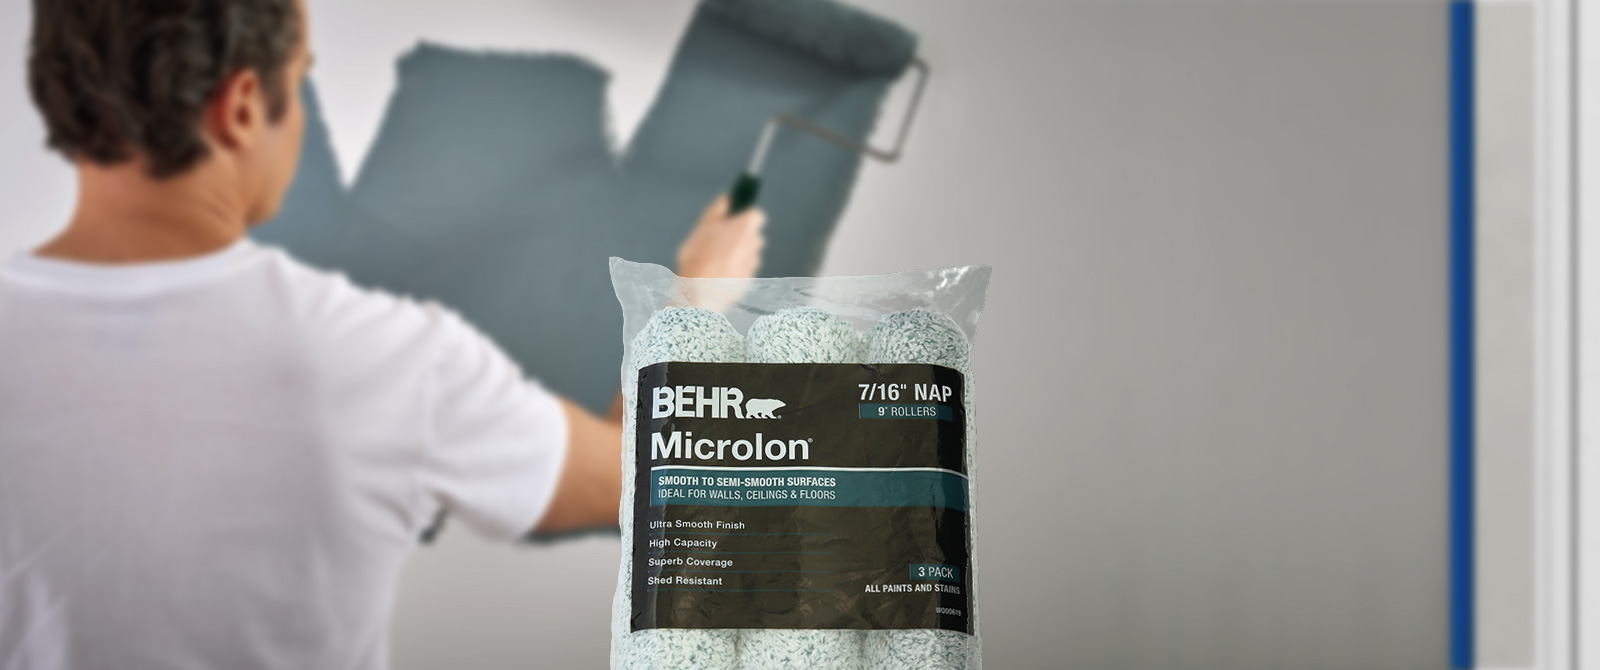 Behr Microlon 9 inch rollers are now available to order.